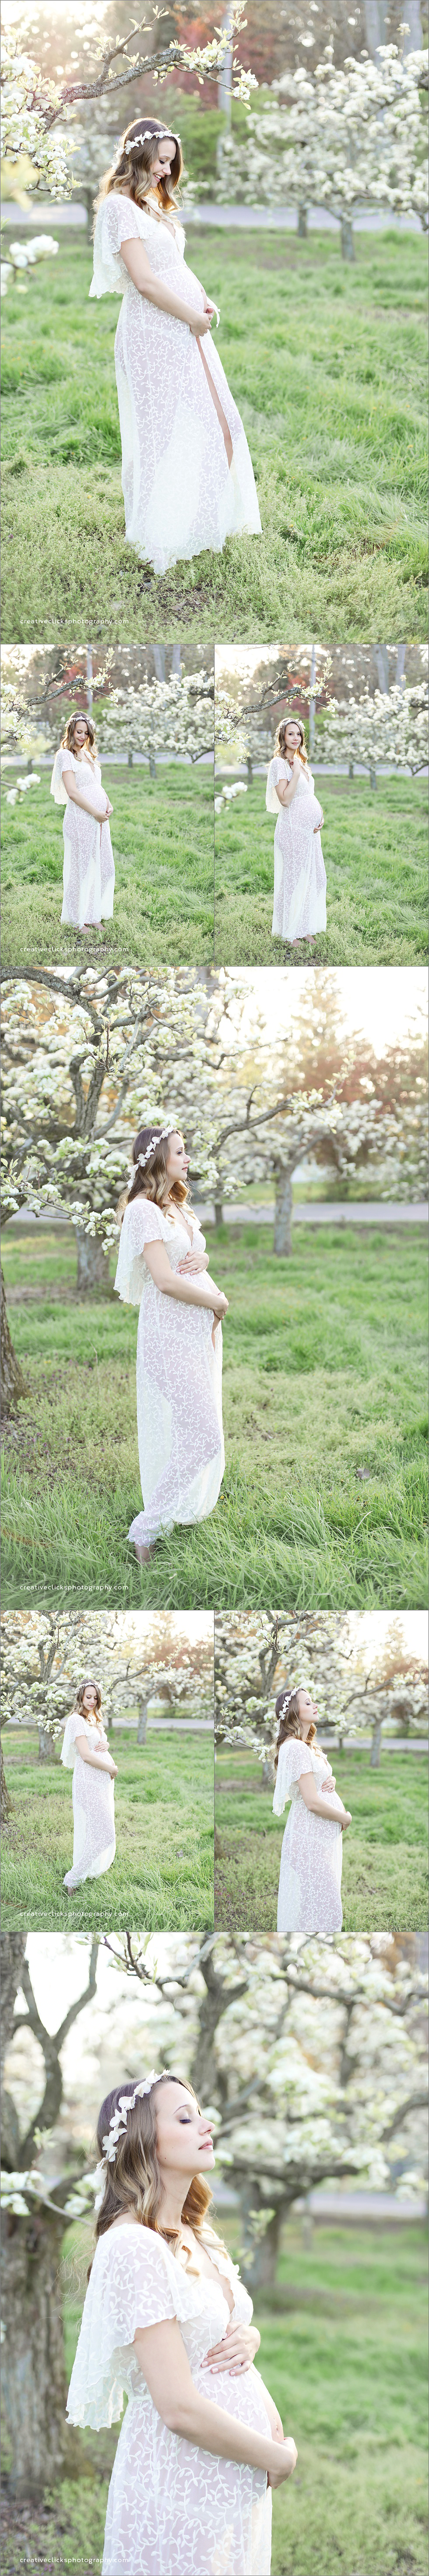 gorgeous maternity session in Niagara's flowering orchards